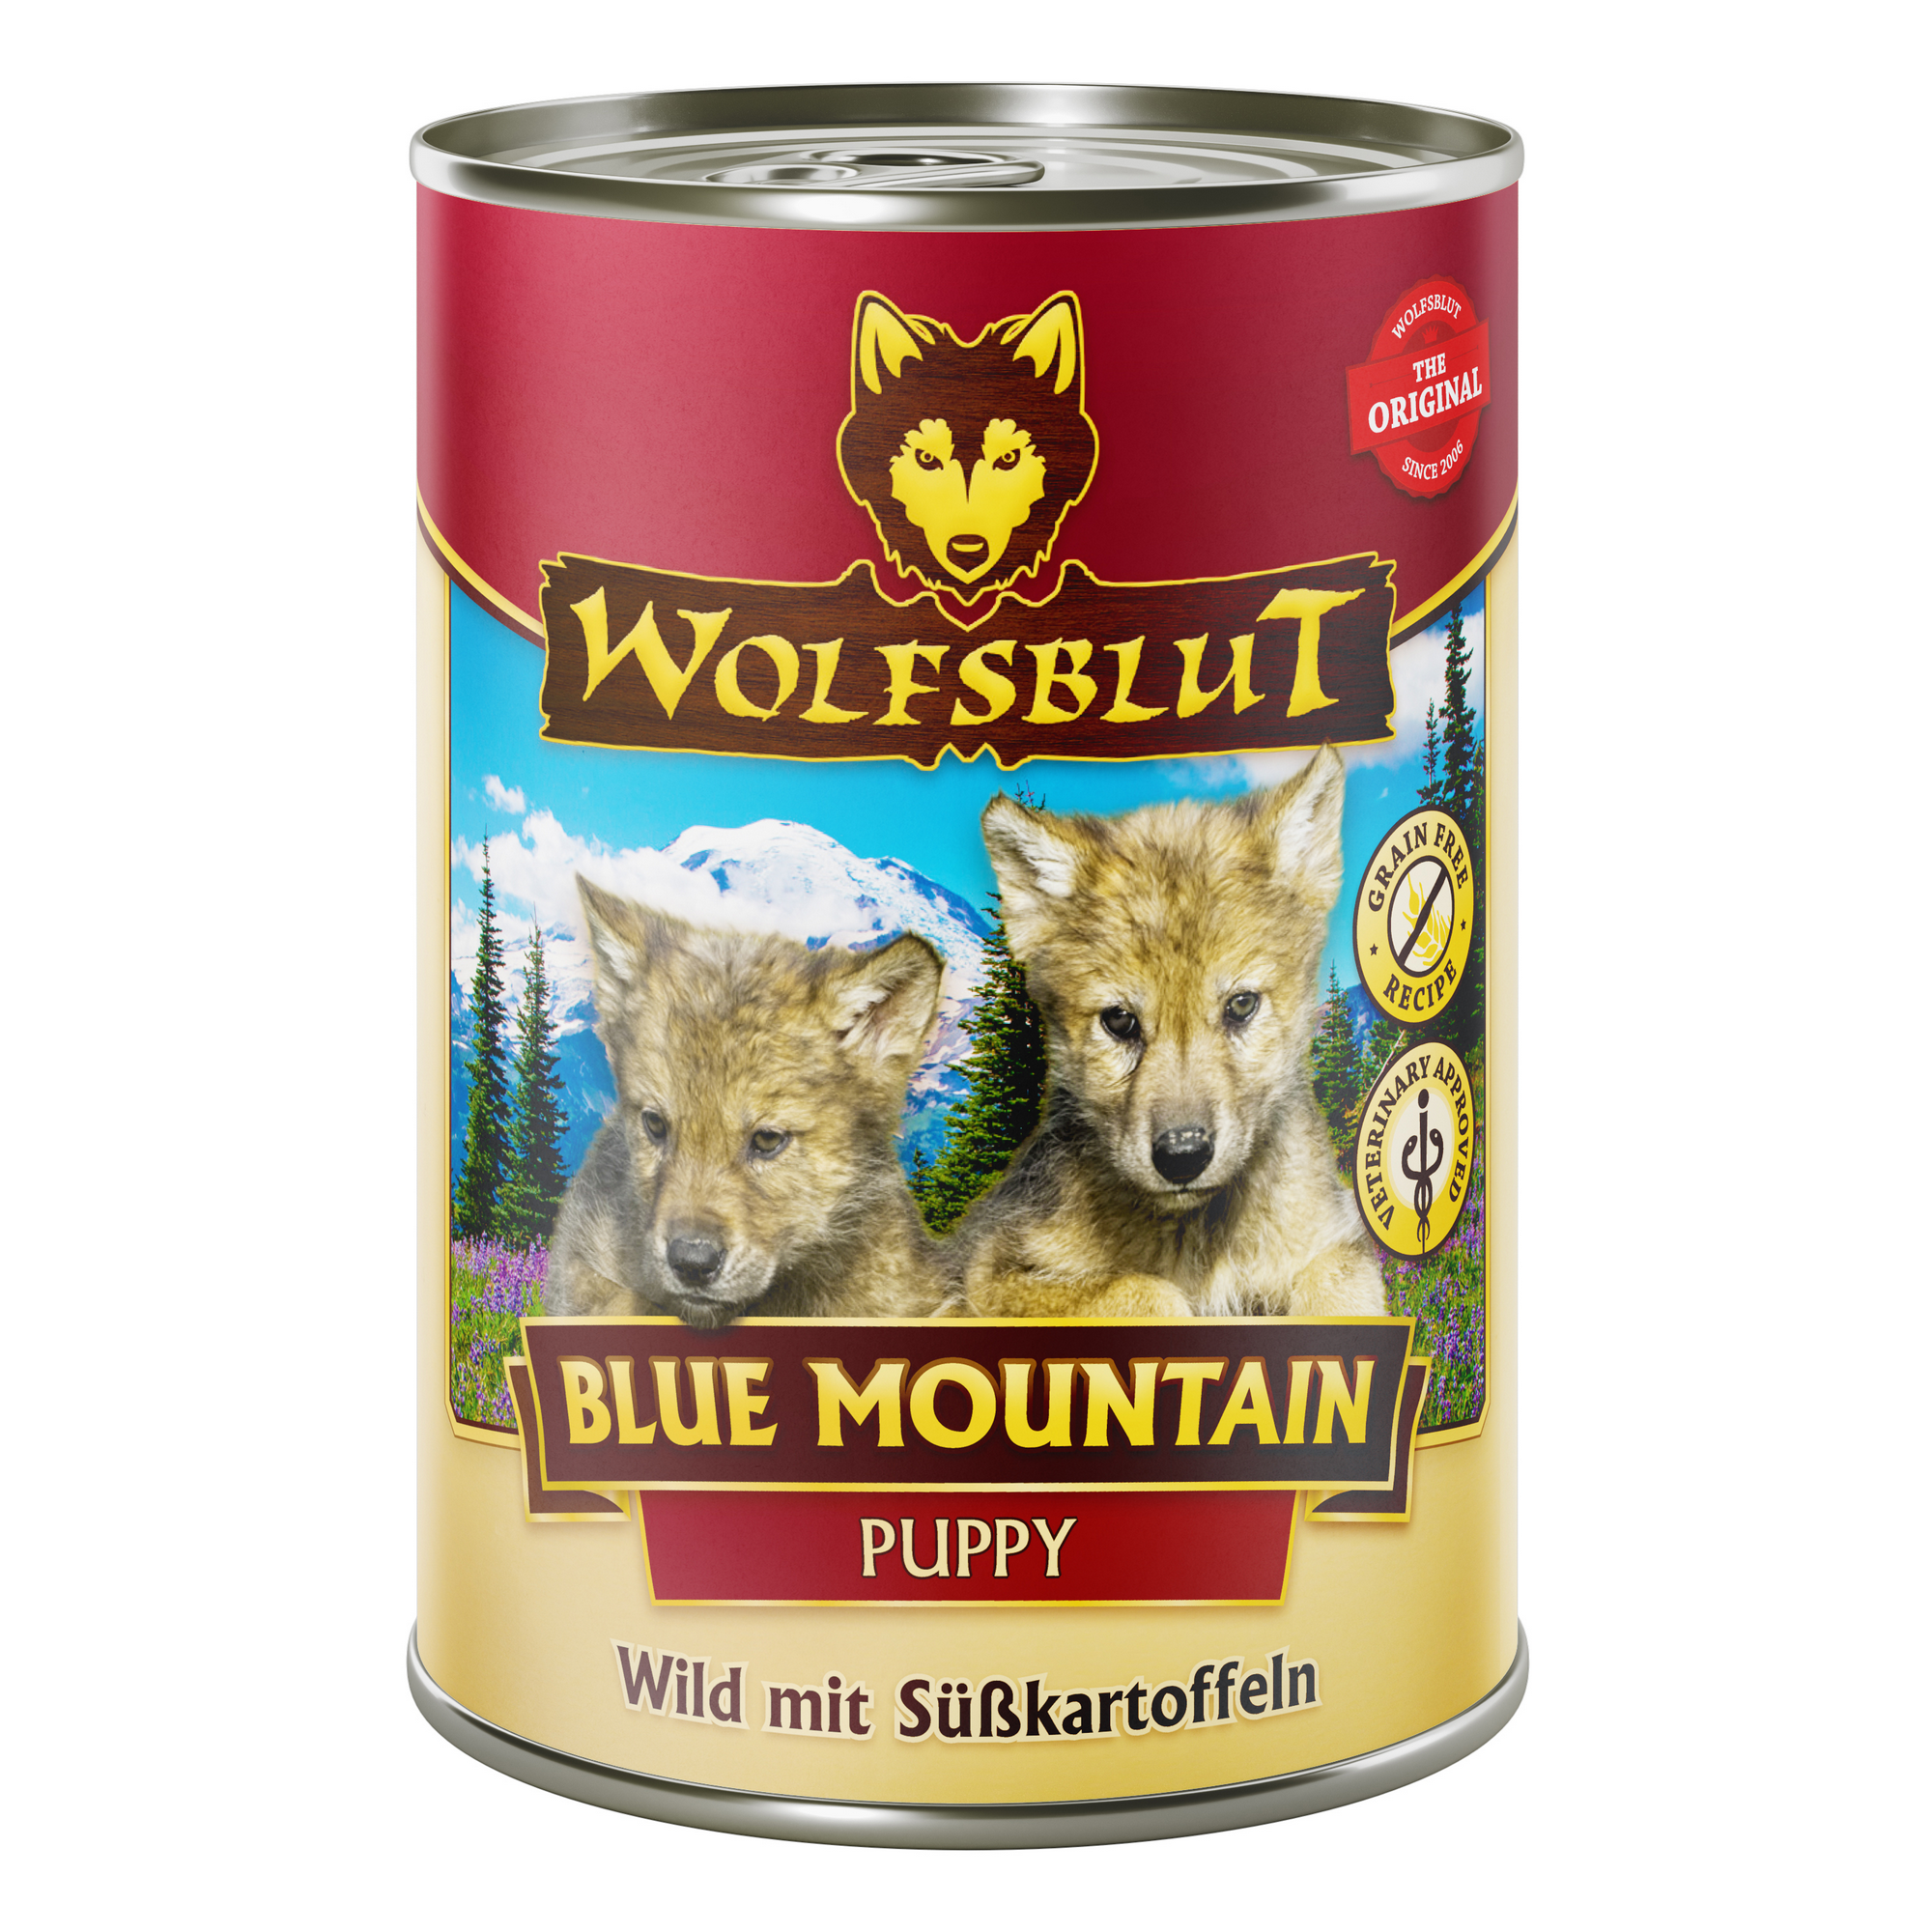 Hundenassfutter 'Blue Mountain' Puppy 395 g + product picture